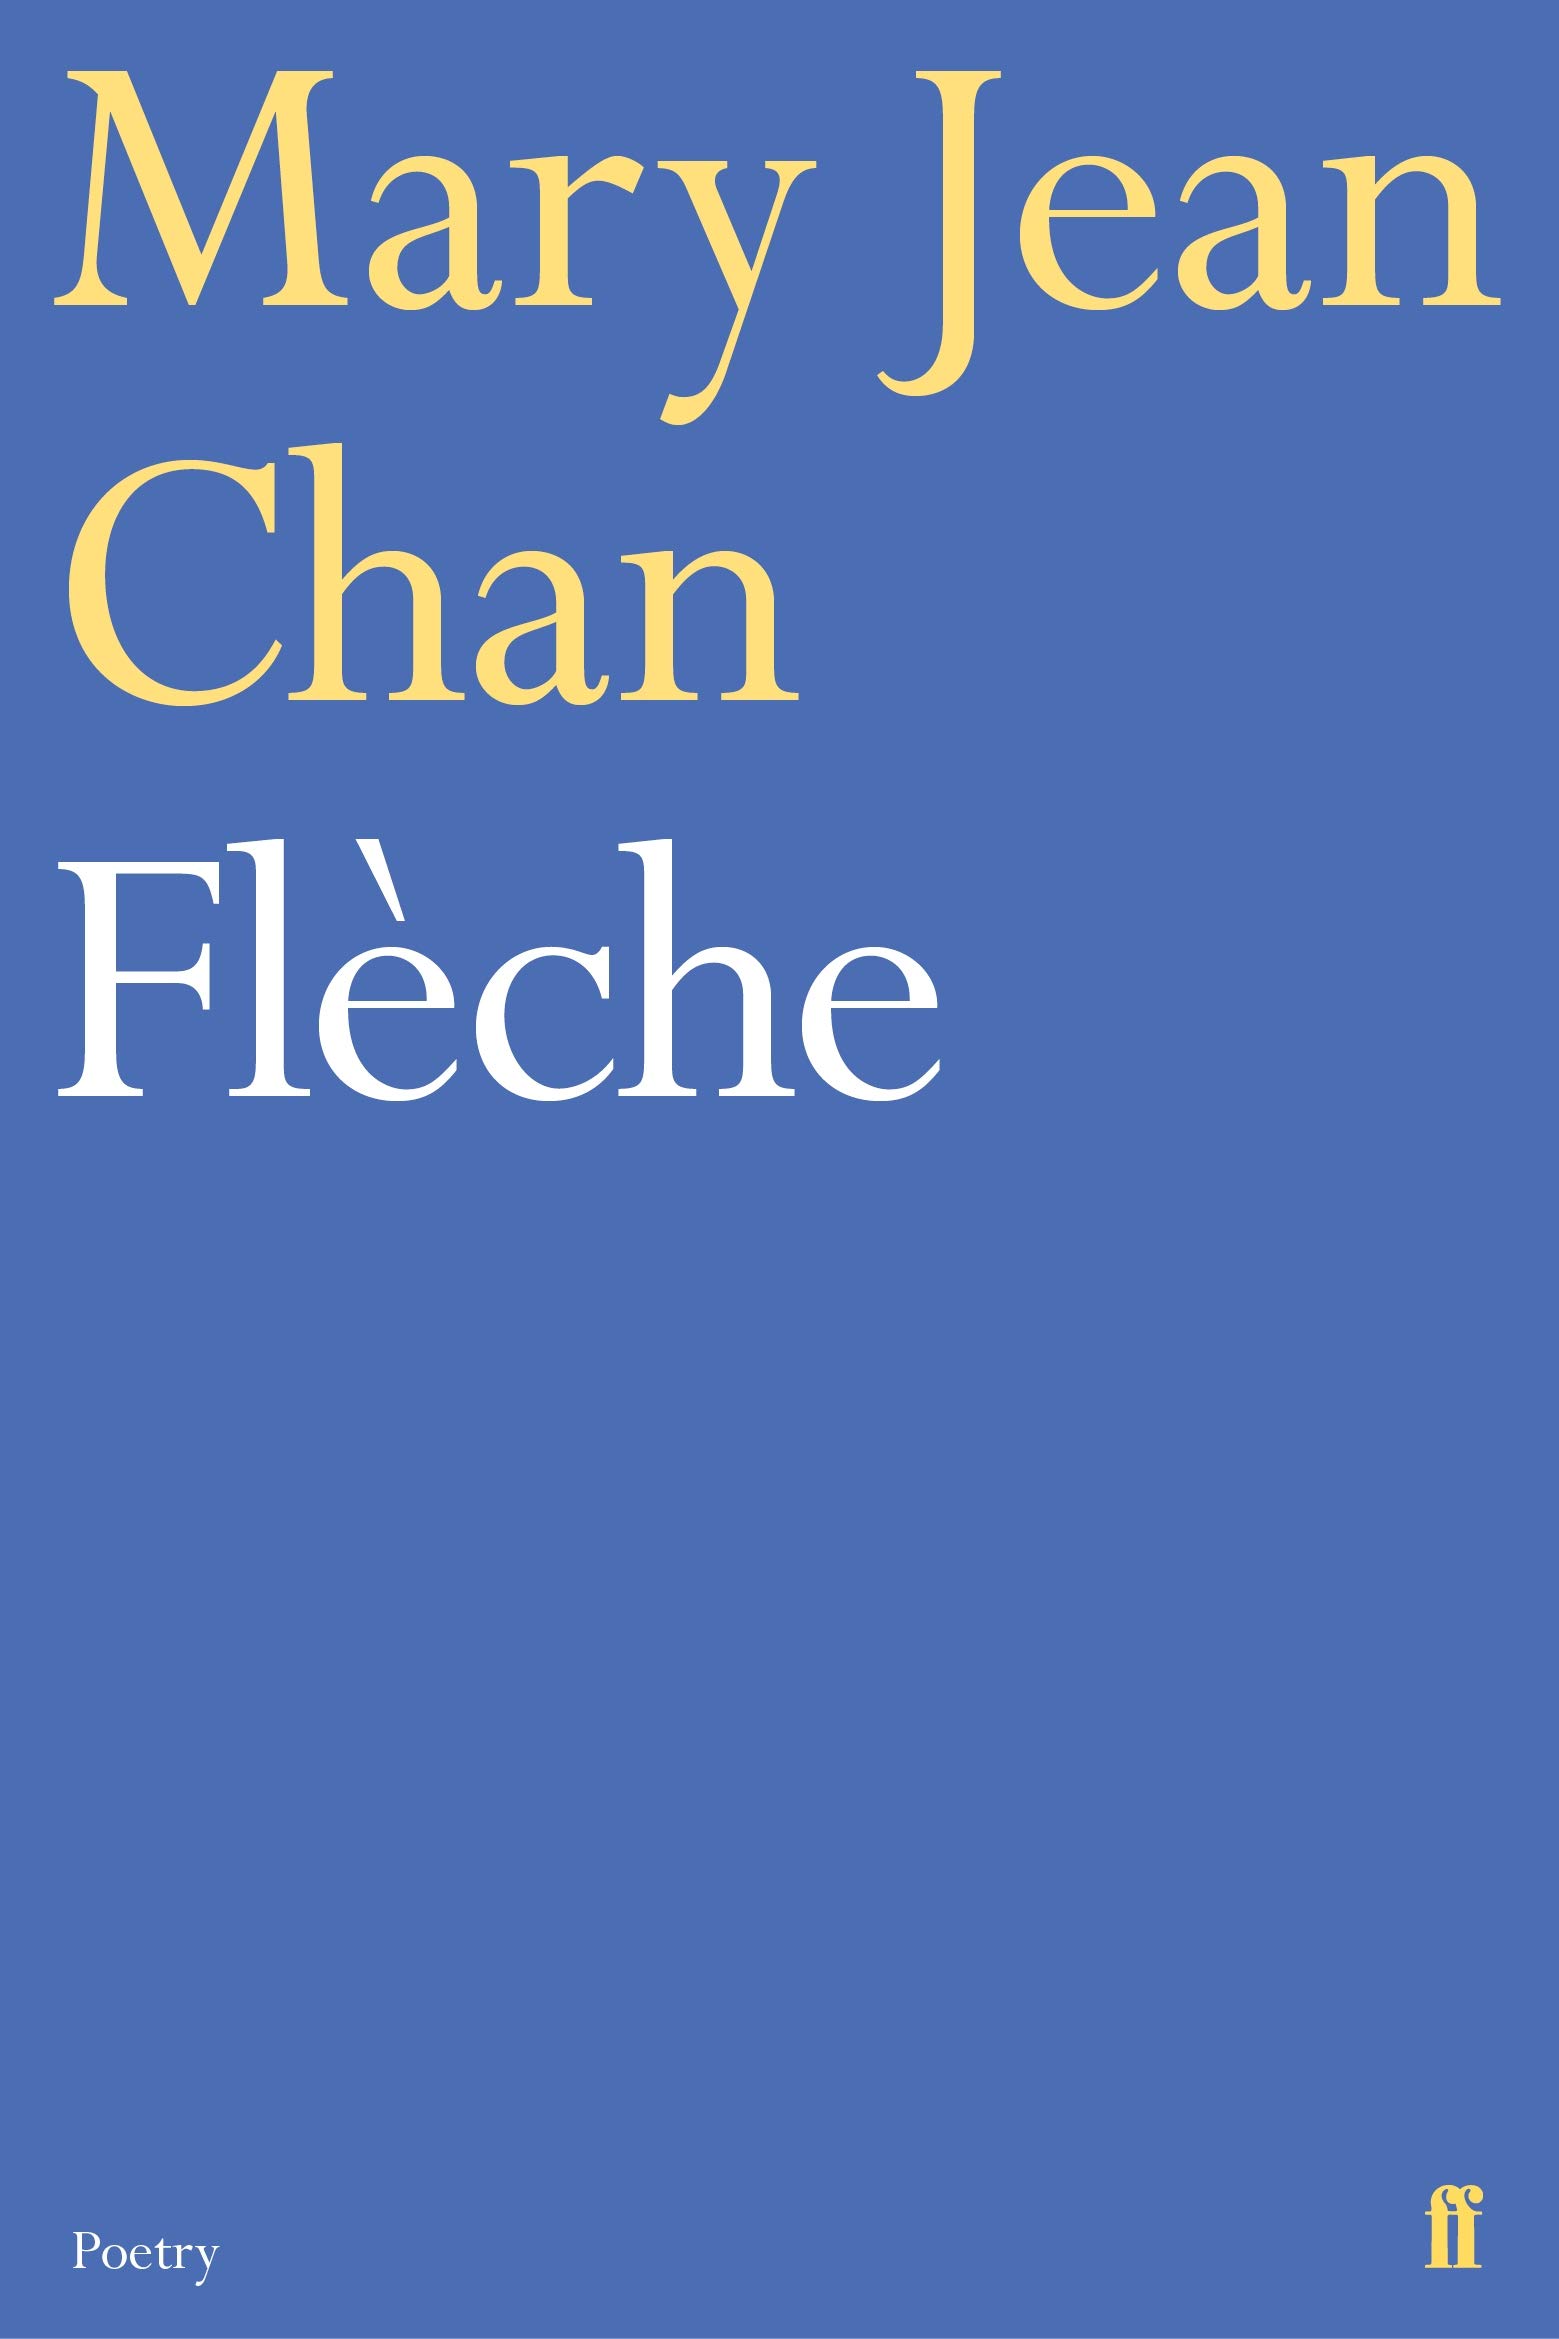 Personal politics and the modern English language: Mary Jean Chan’s ‘Flèche’